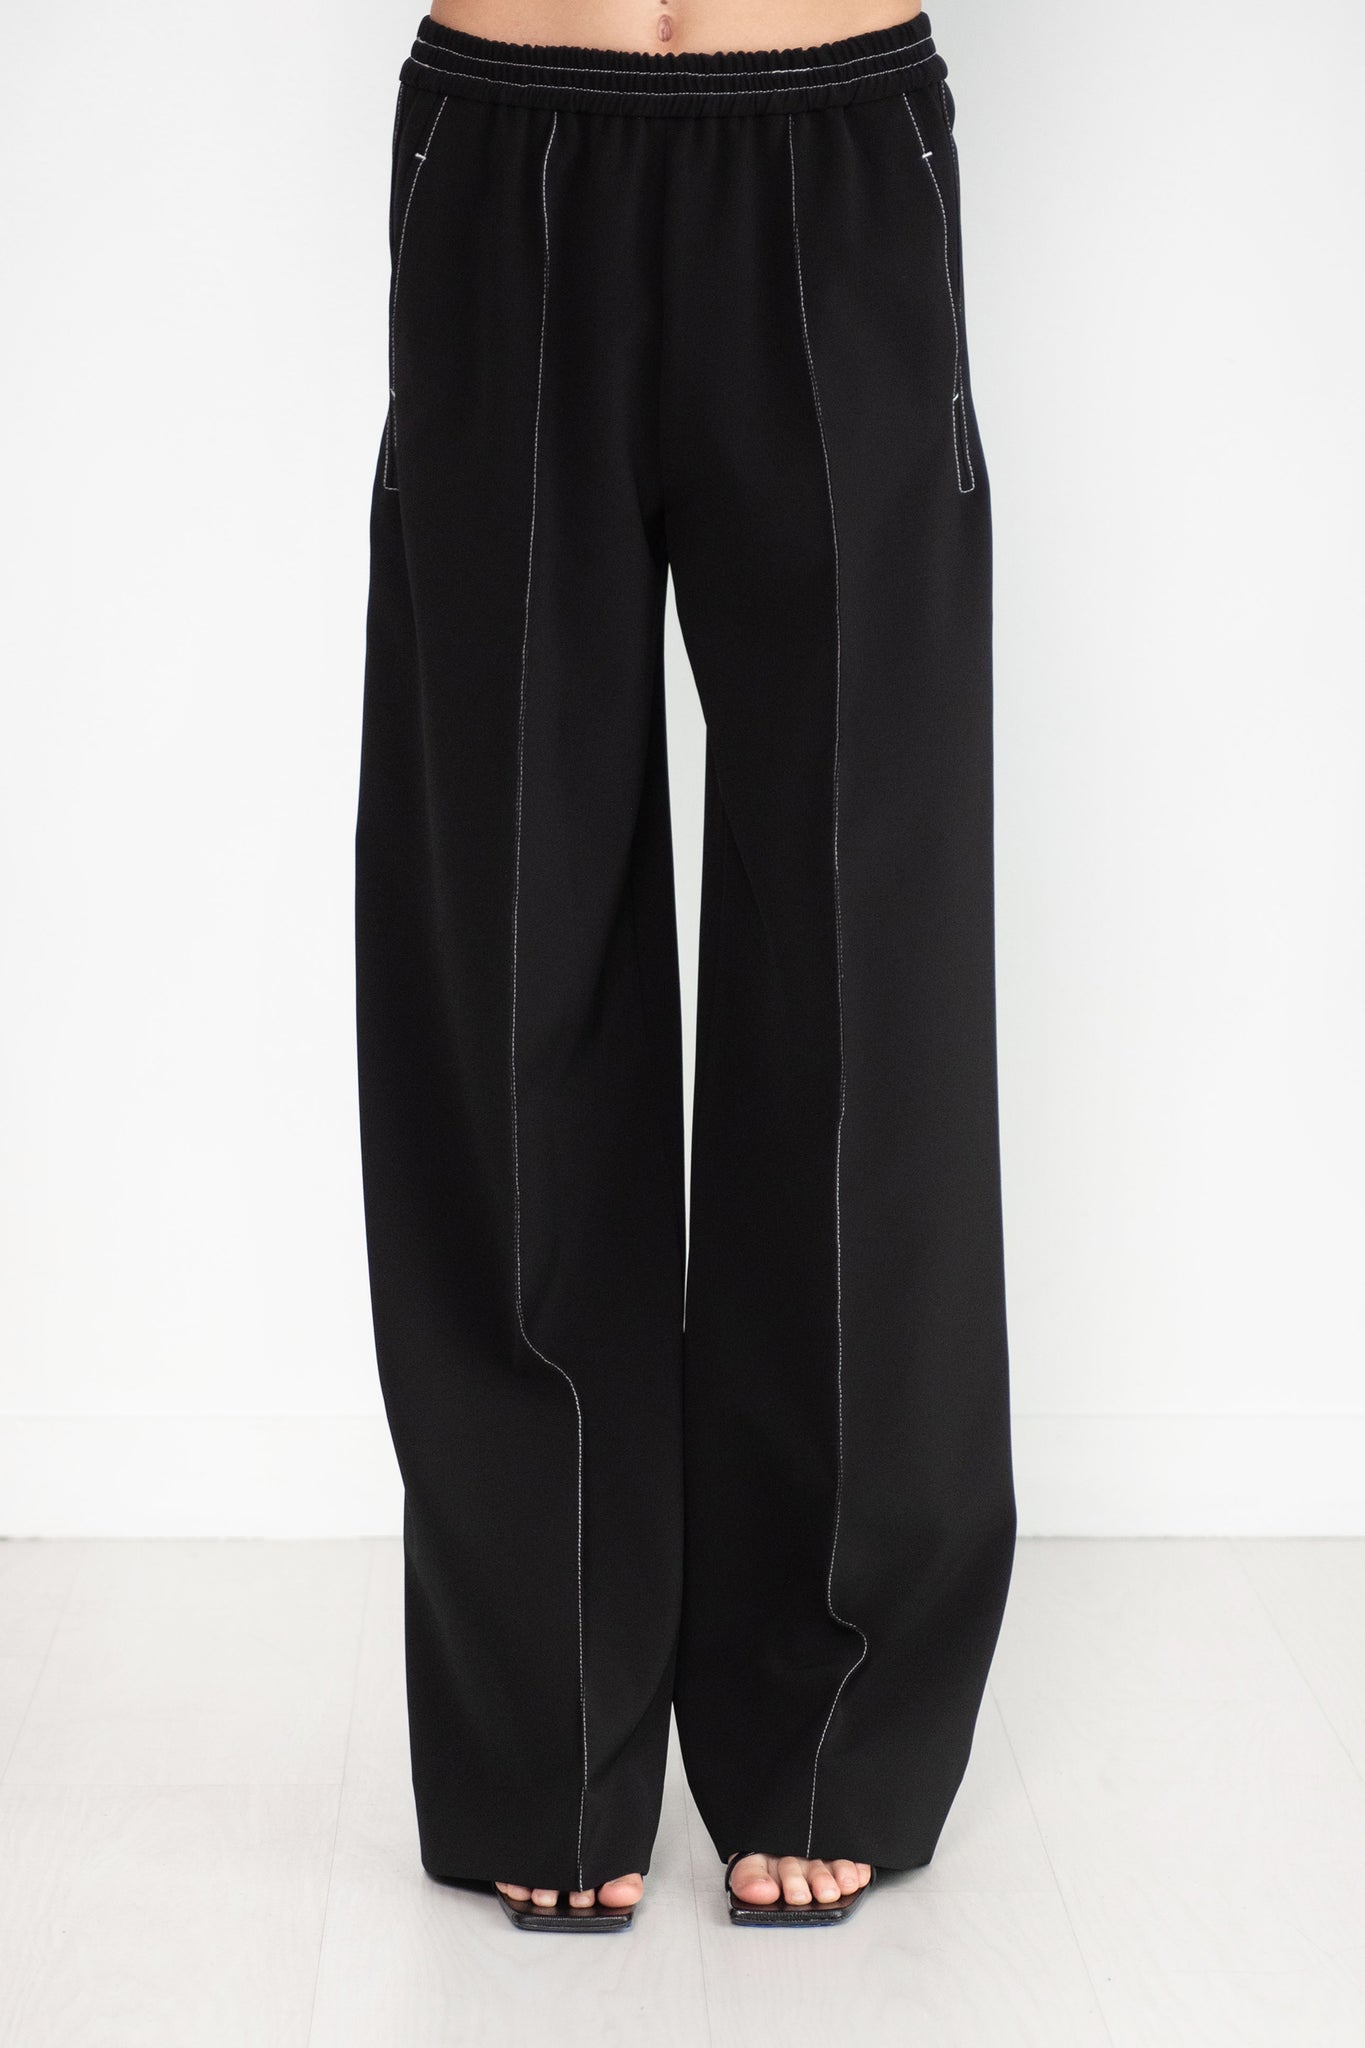 ROSETTA GETTY - Relaxed Pull On Pant, Black